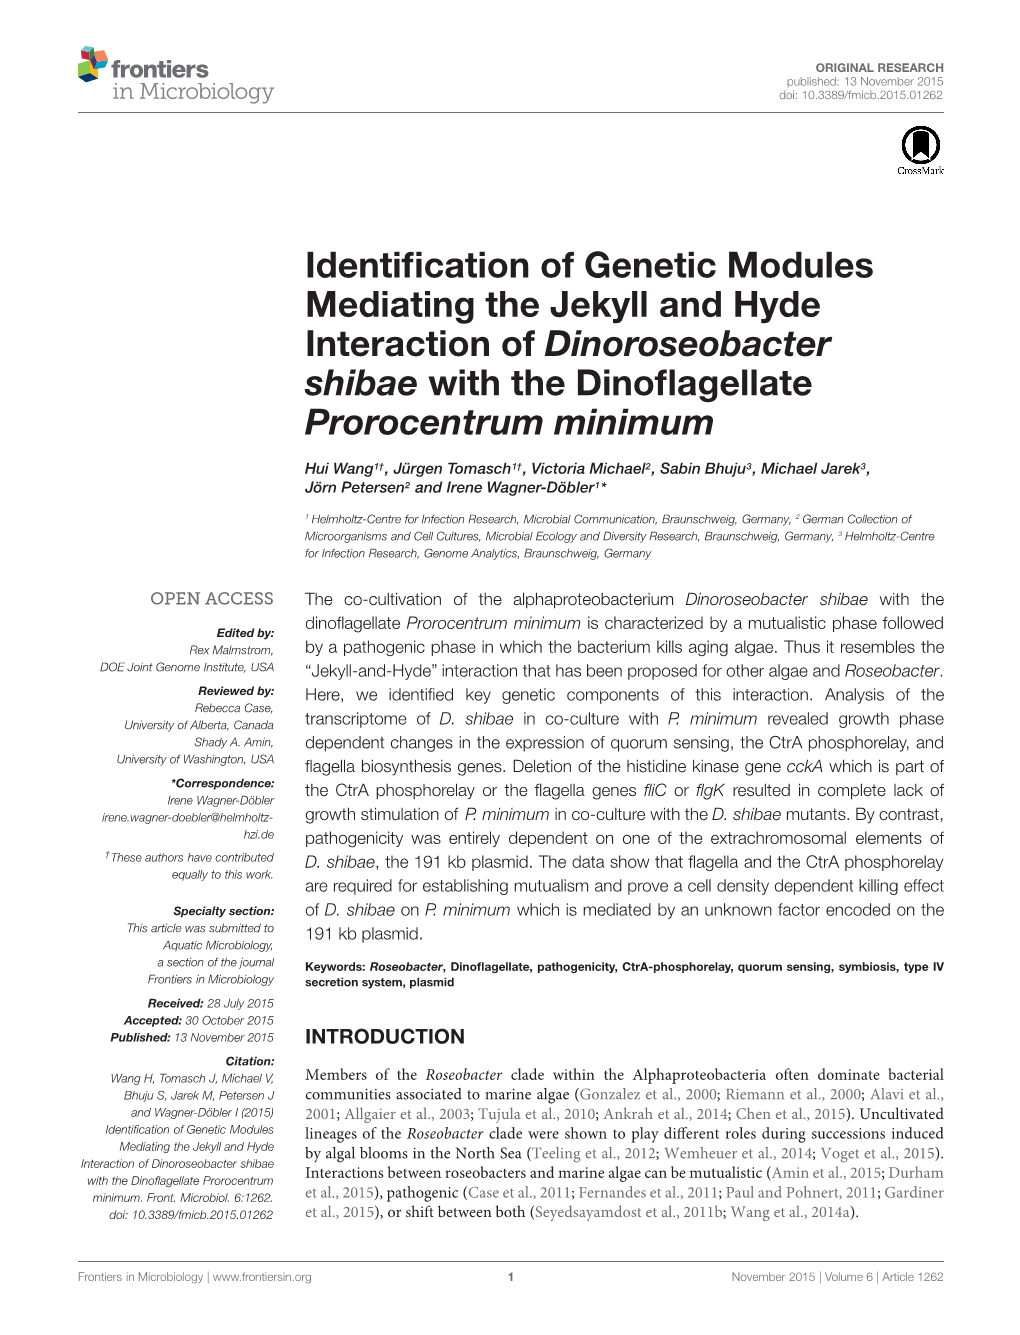 Identification of Genetic Modules Mediating the Jekyll and Hyde